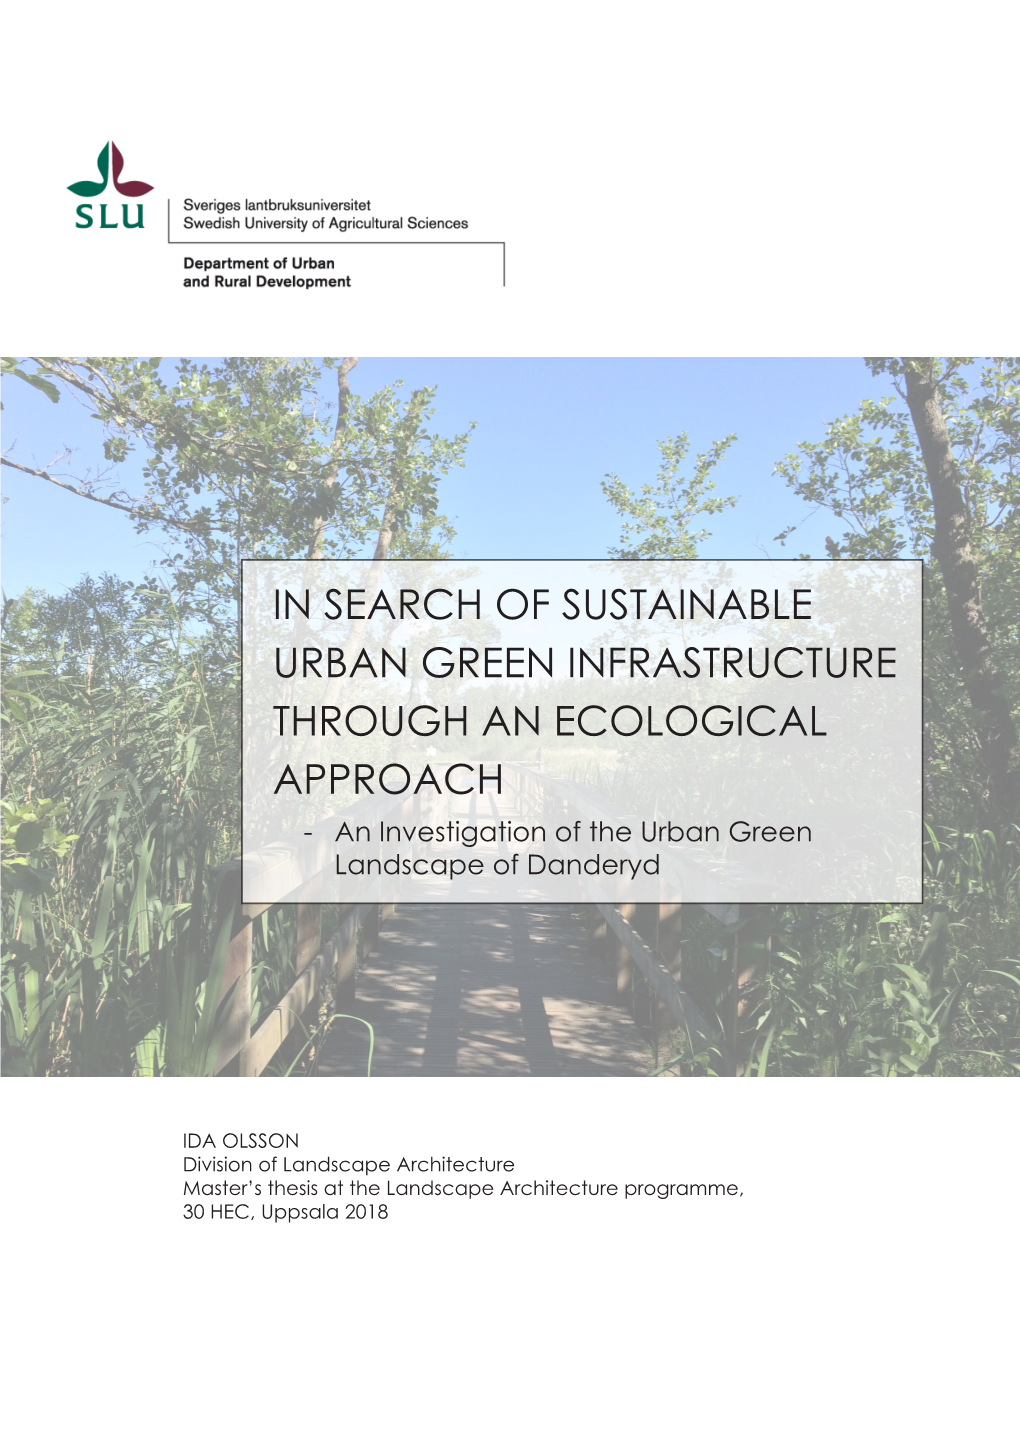 IN SEARCH of SUSTAINABLE URBAN GREEN INFRASTRUCTURE THROUGH an ECOLOGICAL APPROACH - an Investigation of the Urban Green Landscape of Danderyd